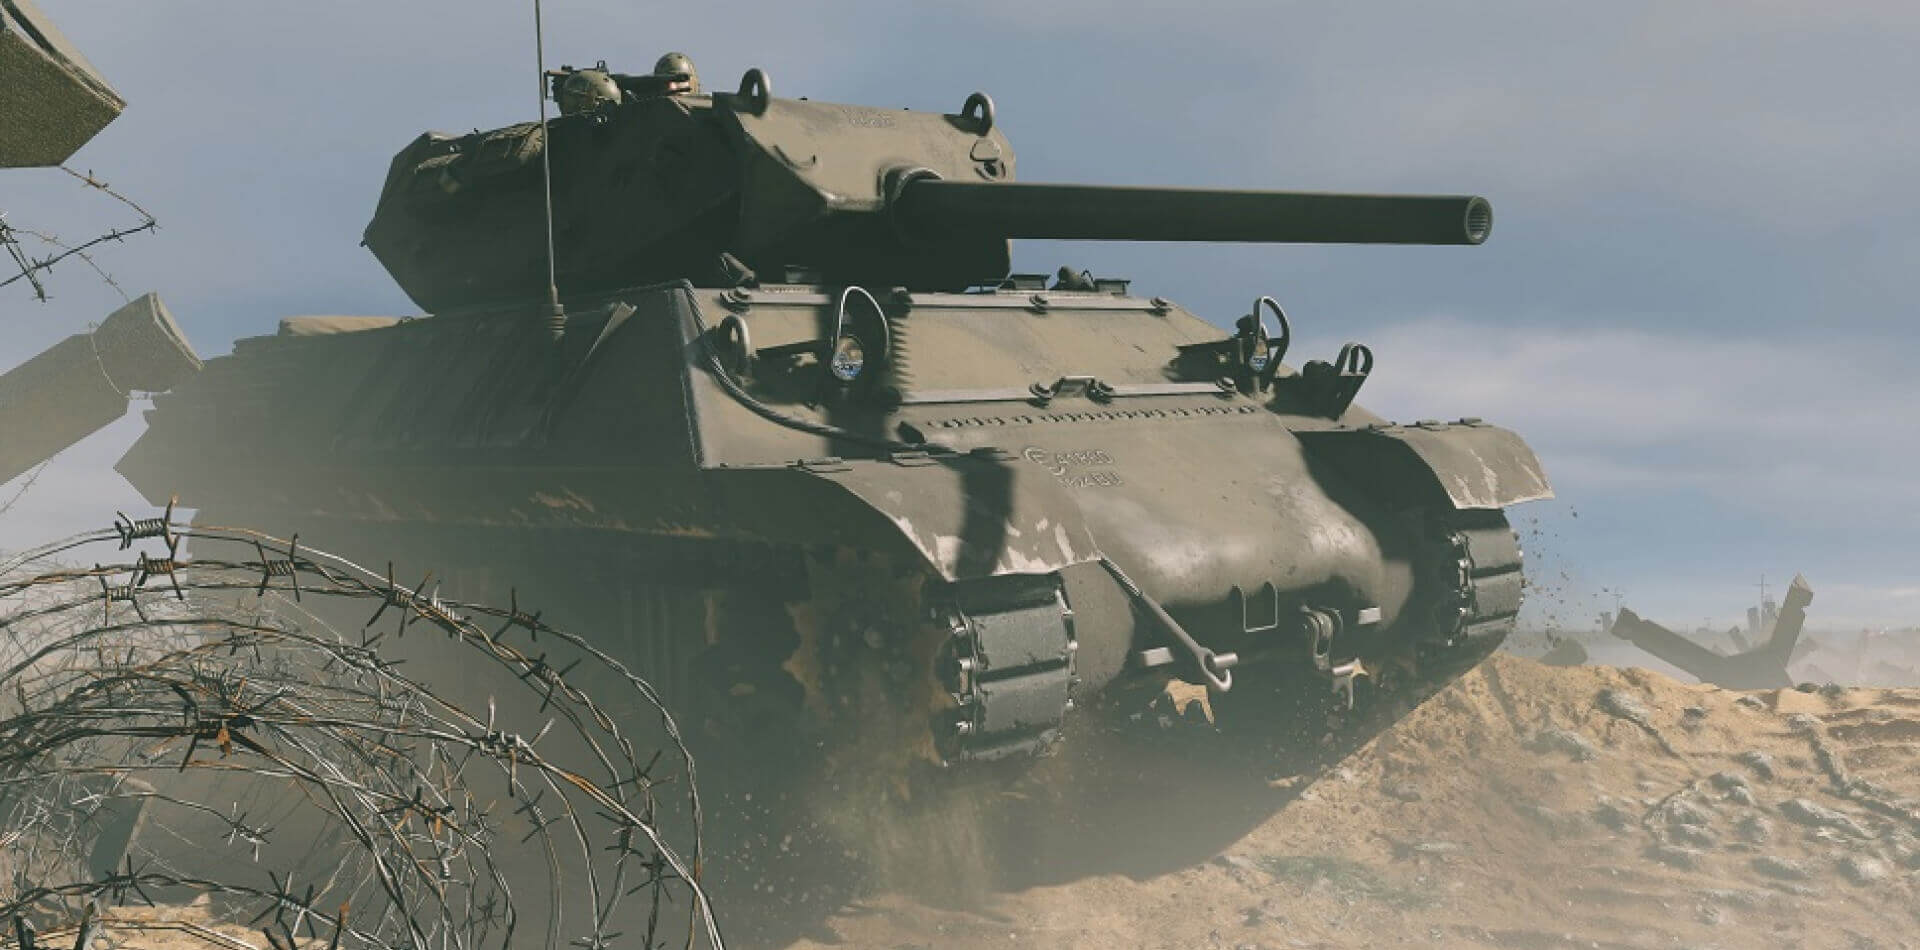 Two new Premium tanks for the battle of Tunisia - Suggestions